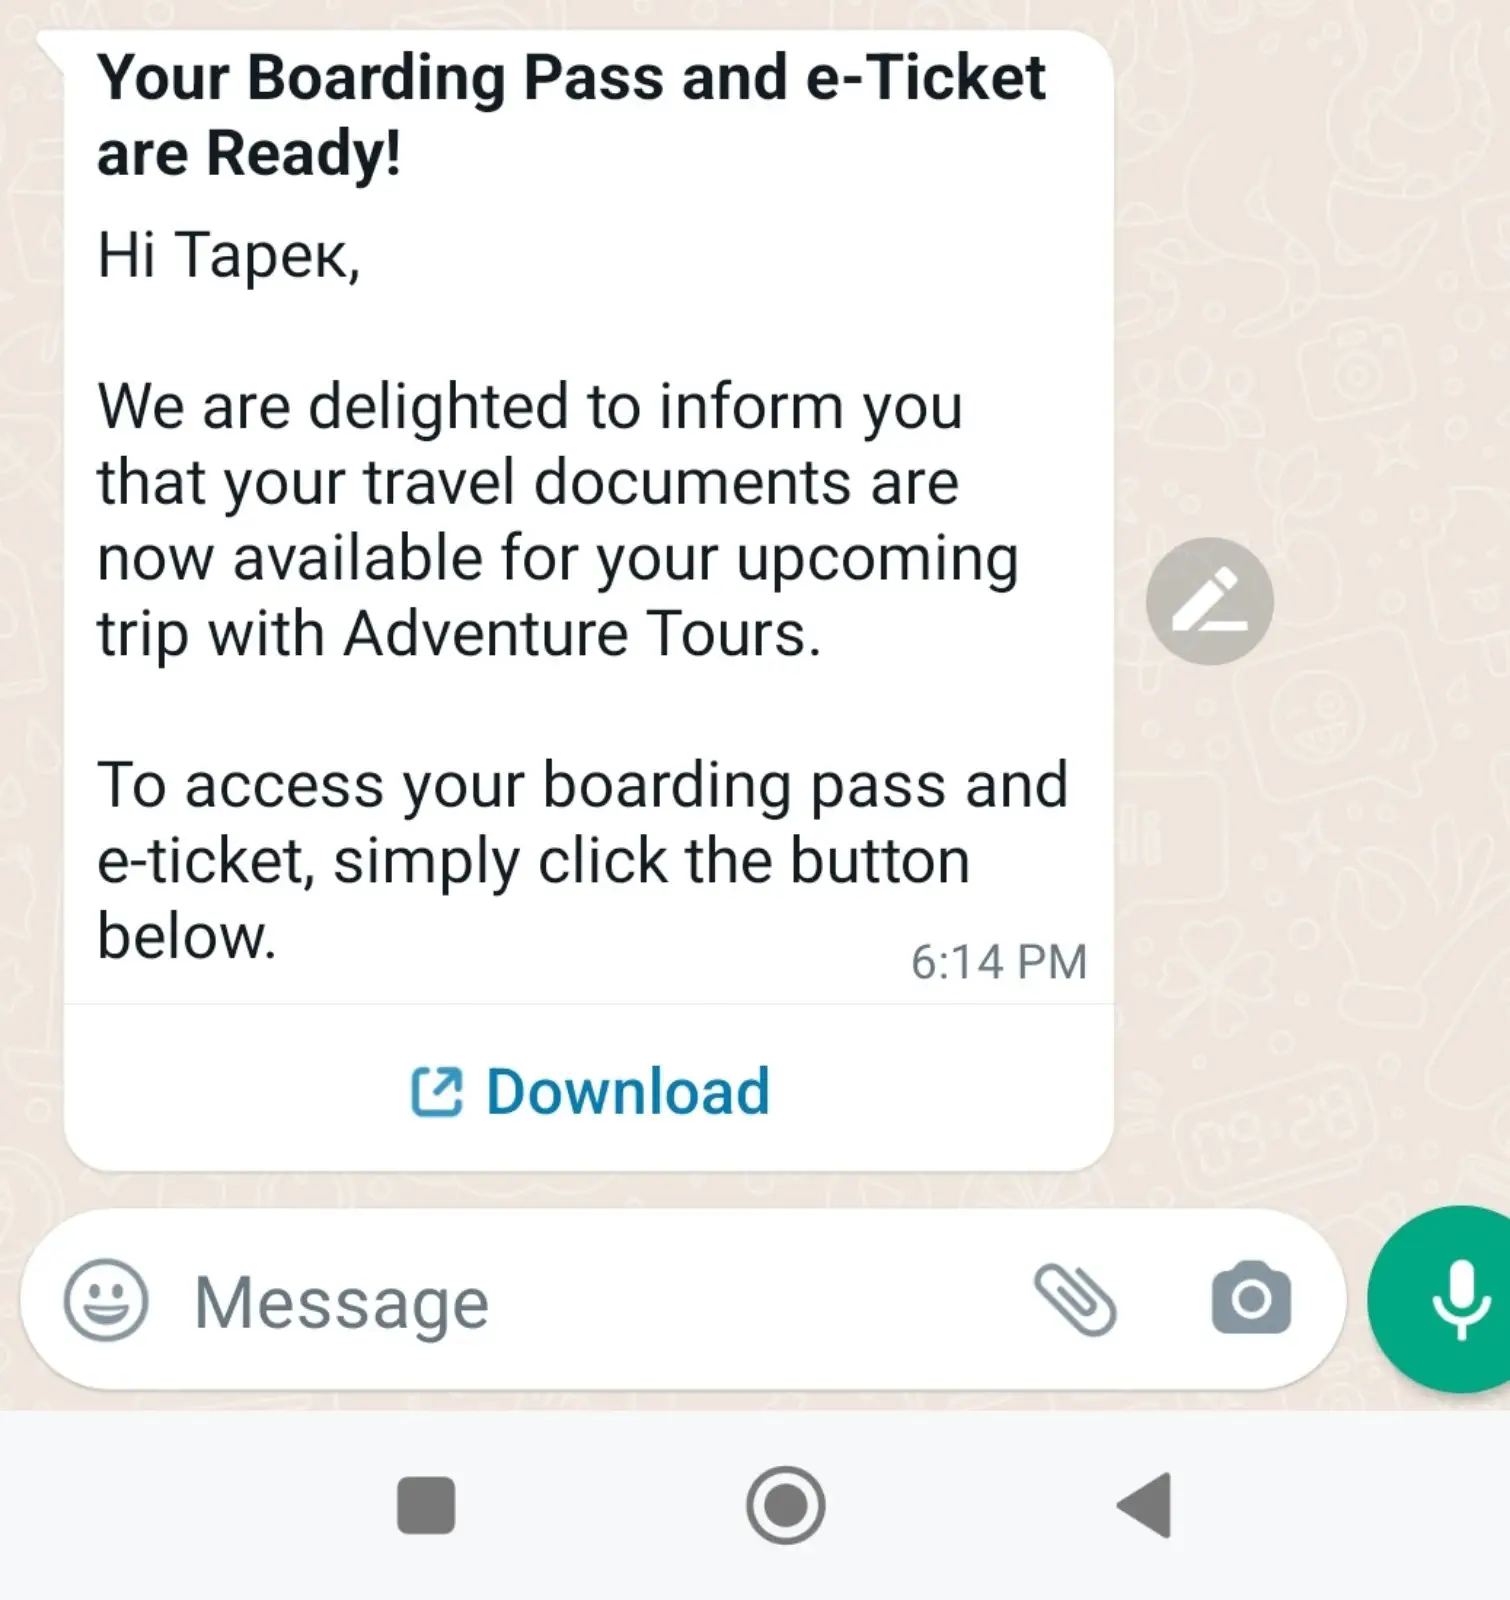 Interactive WhatsApp message with links for downloading a boarding pass and e-ticket